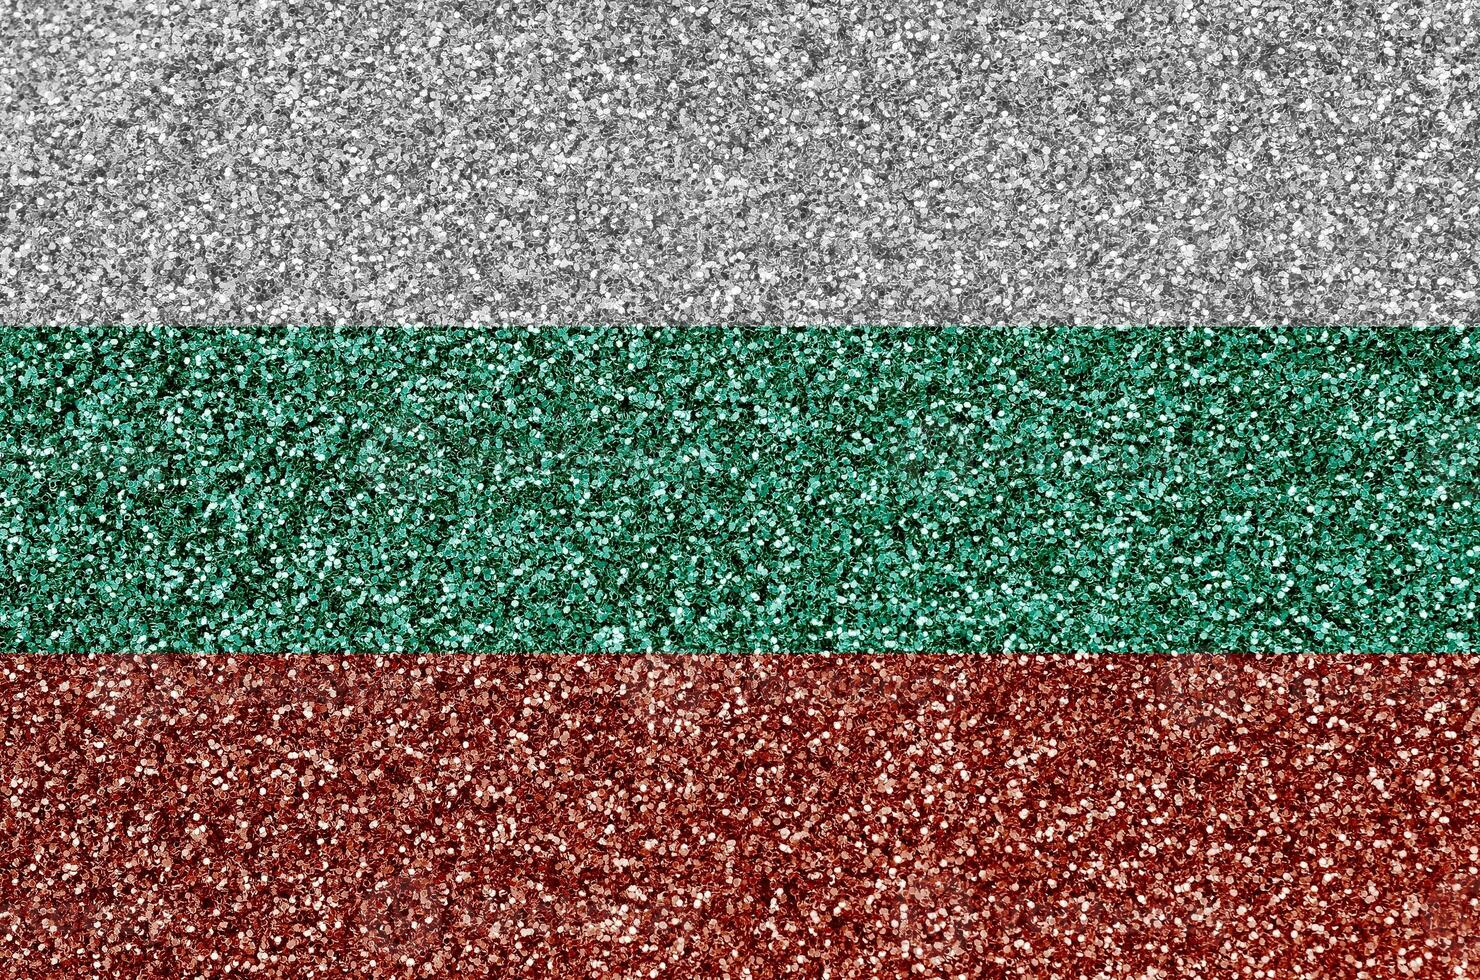 Bulgaria flag depicted on many small shiny sequins. Colorful festival background for party photo